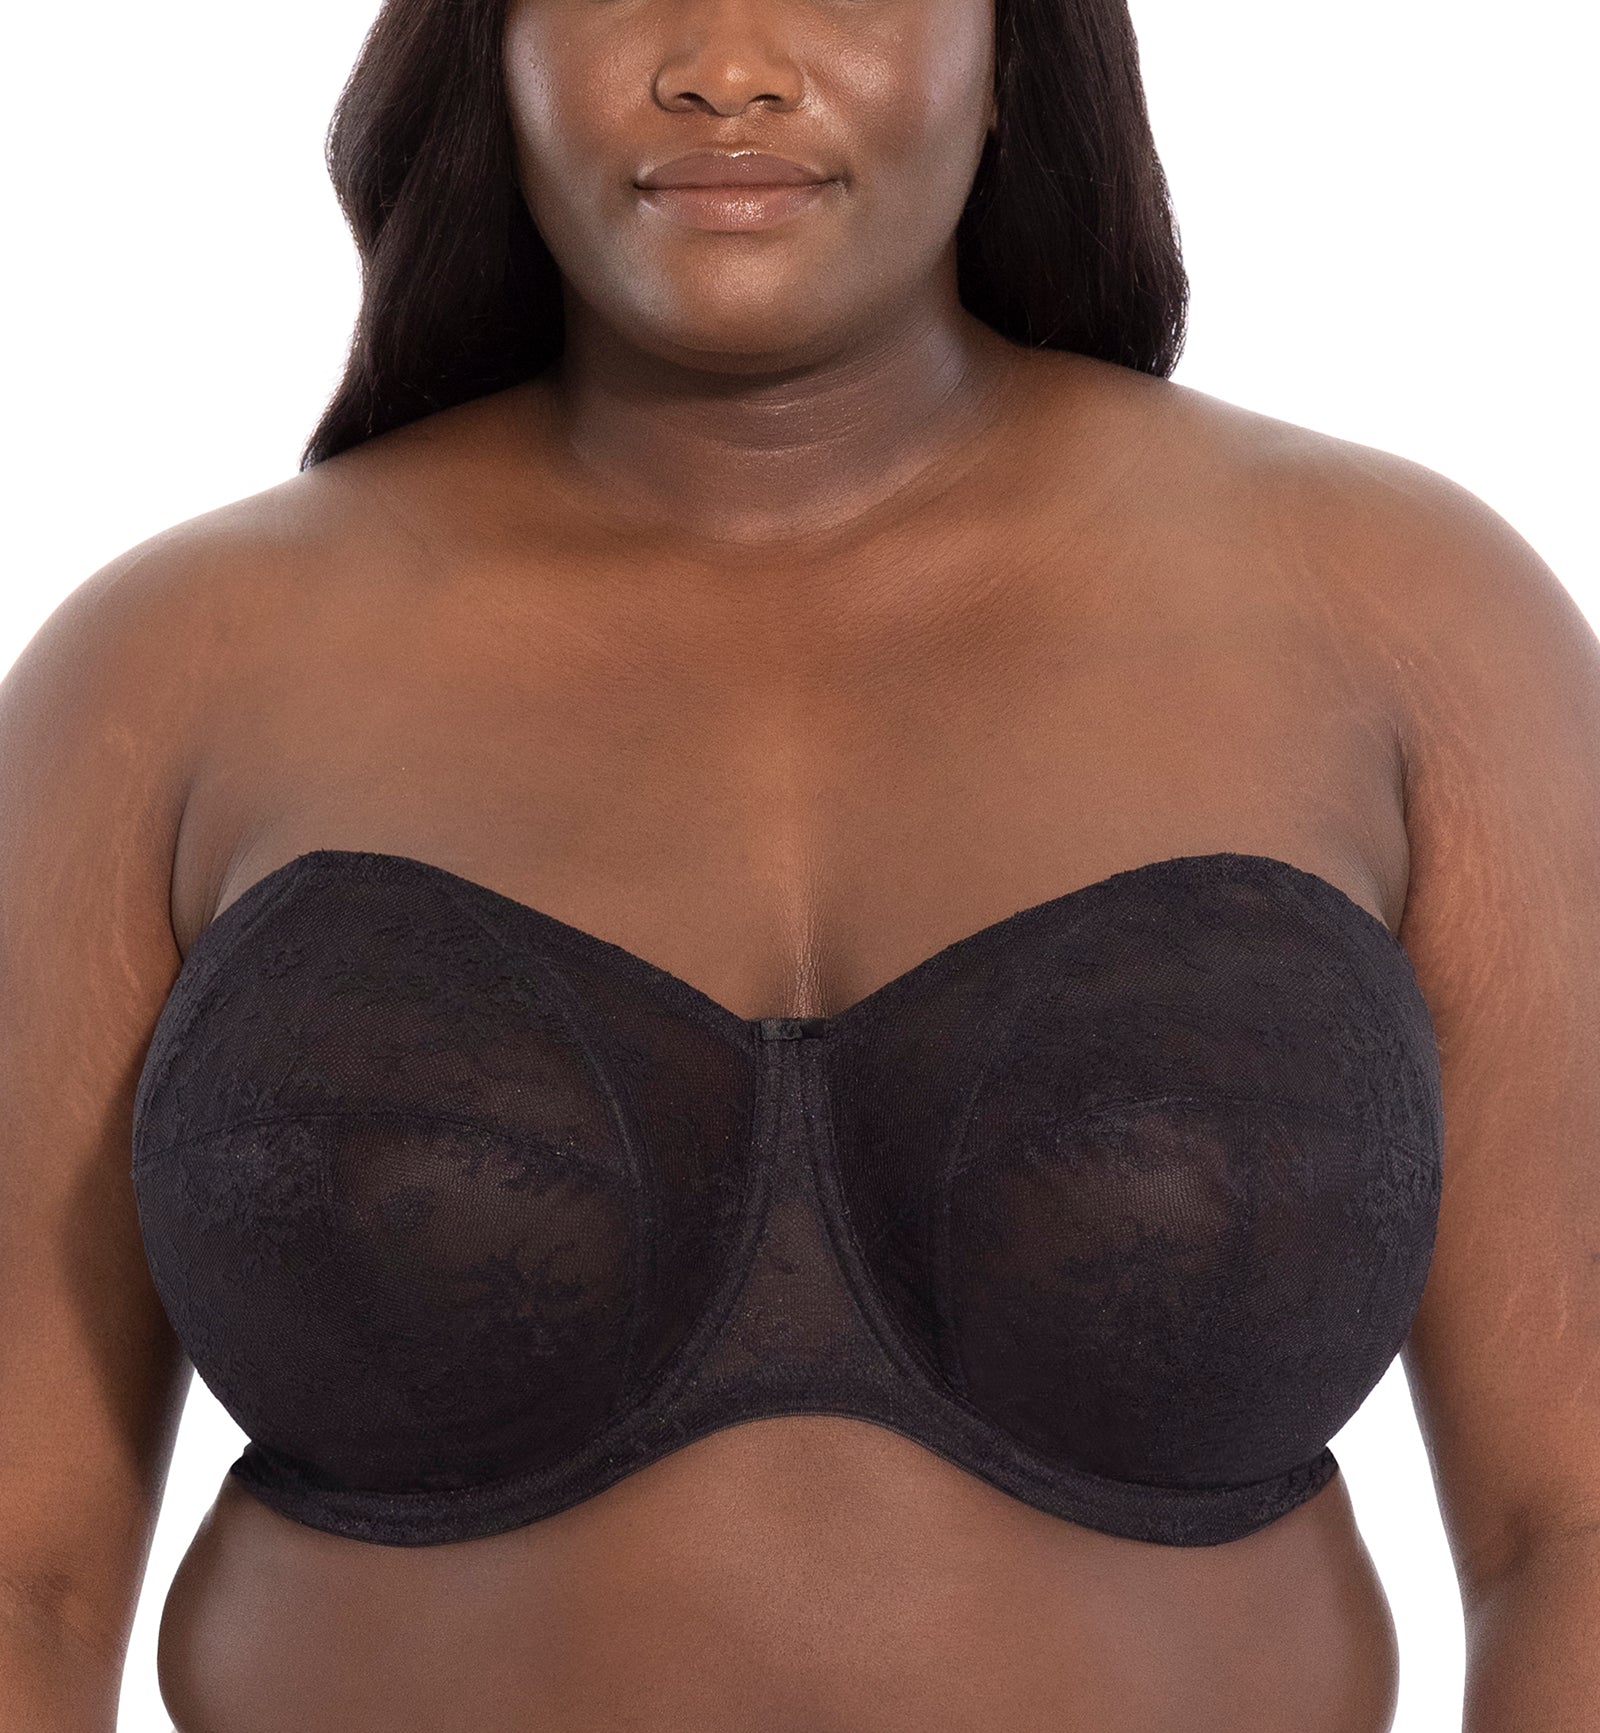 Convertible Bras 30JJ, Bras for Large Breasts